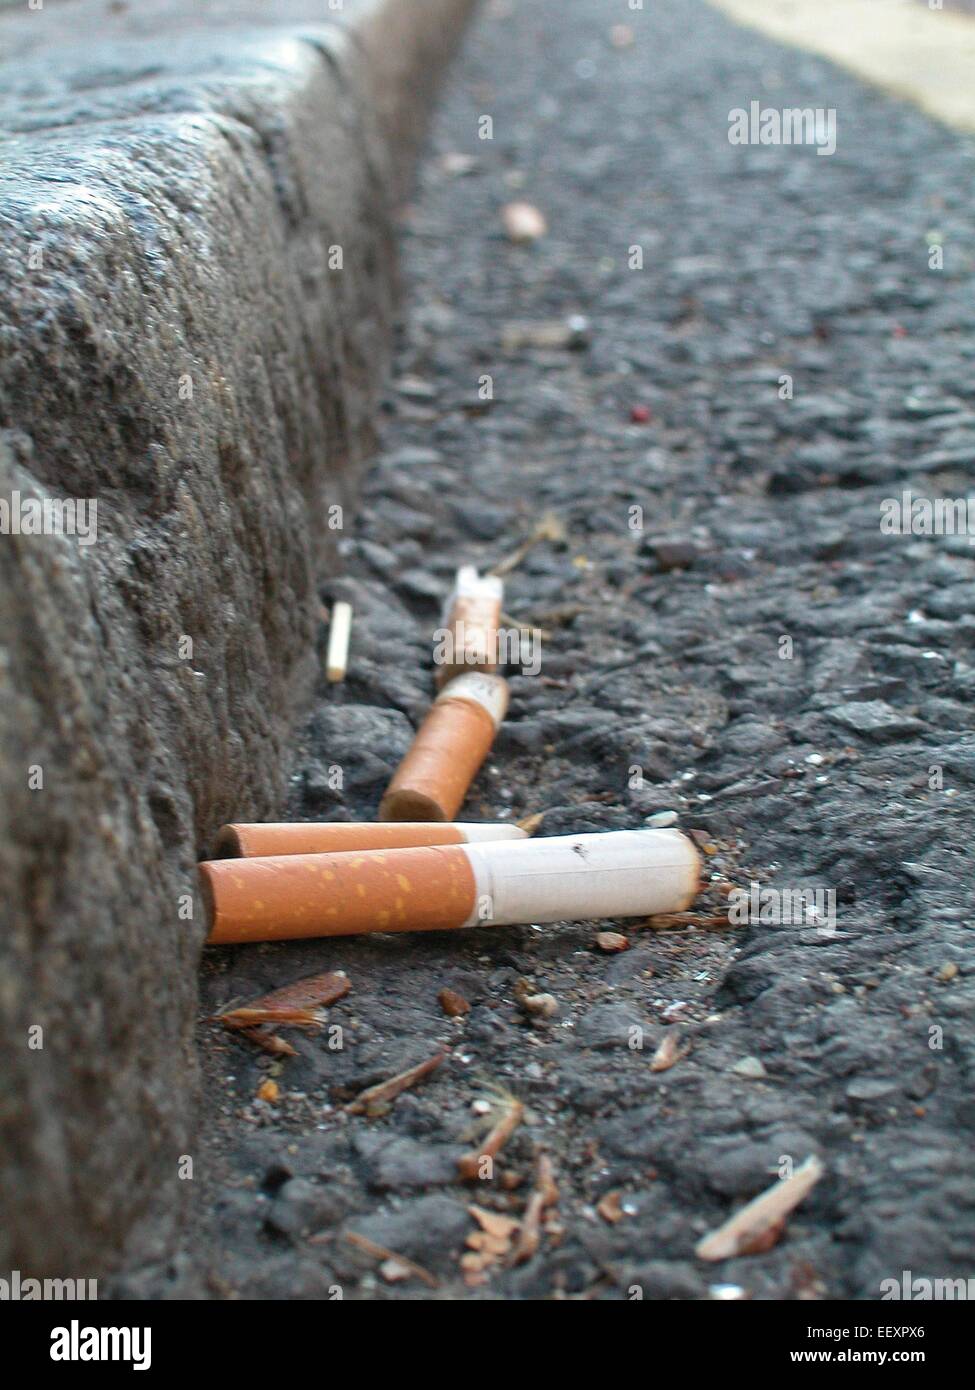 Cigarette Cigarettes butts in gutter discarded smoking material litter Health issues Stock Photo